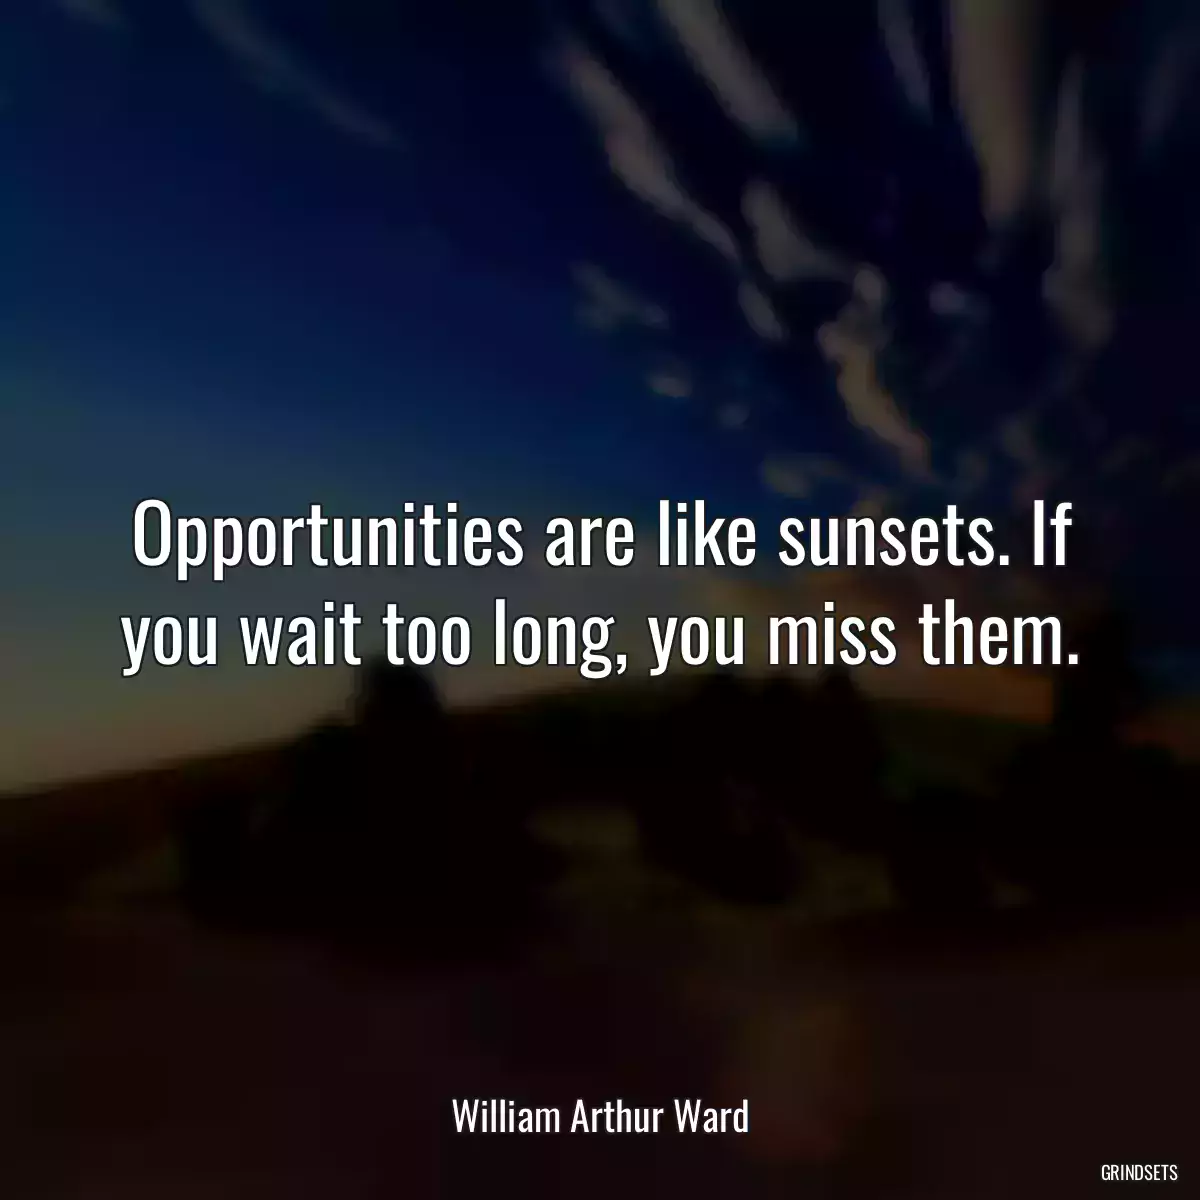 Opportunities are like sunsets. If you wait too long, you miss them.